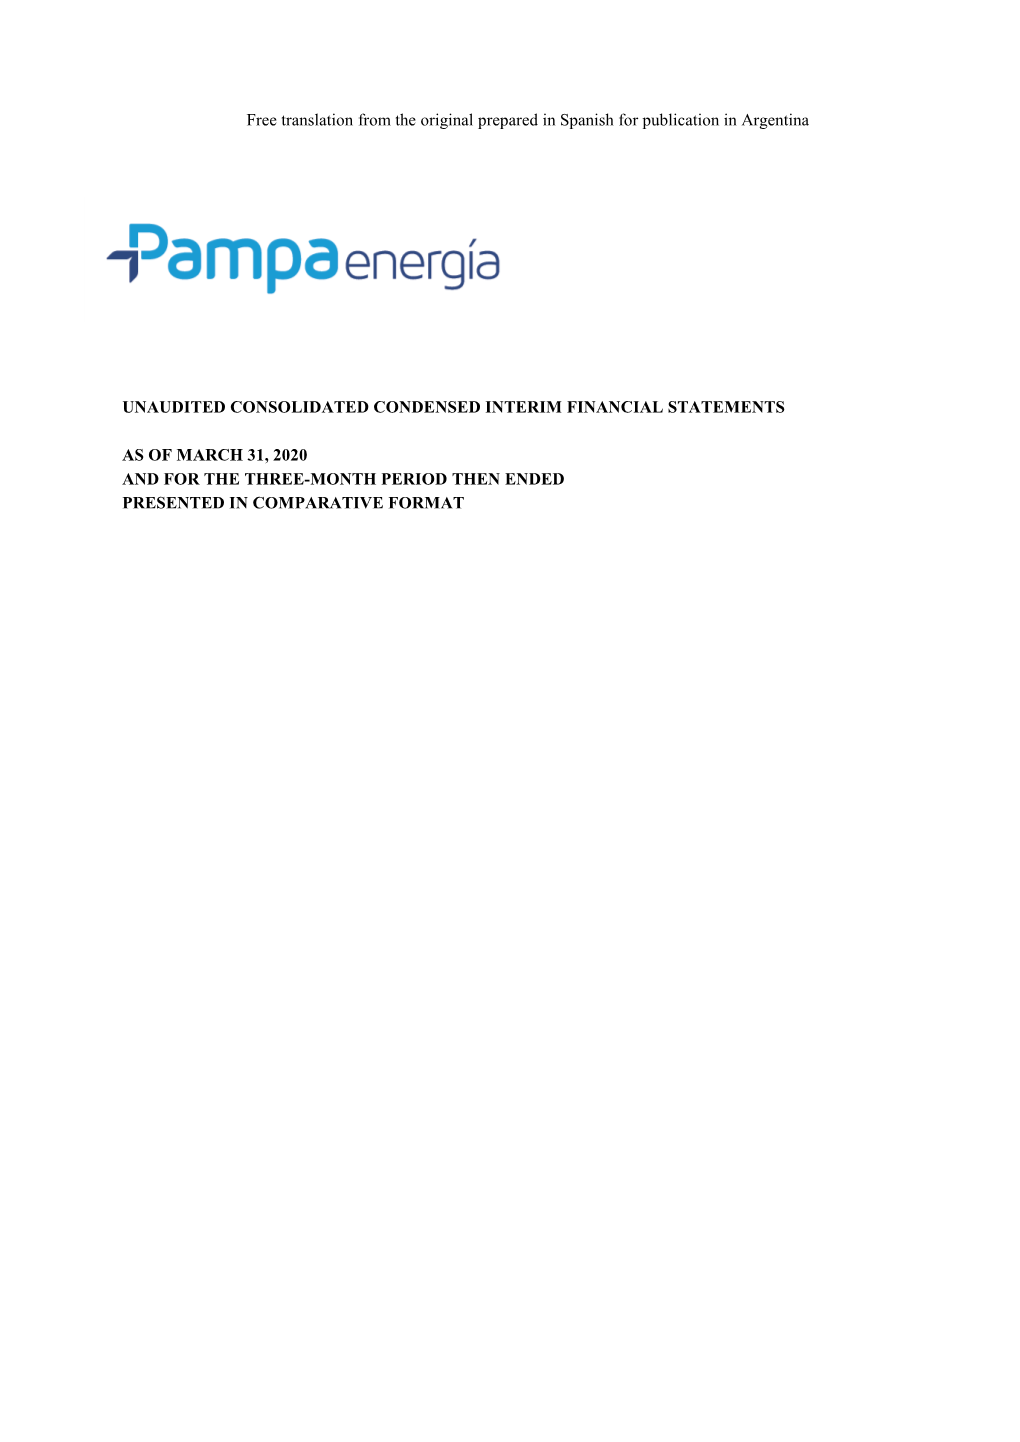 Free Translation from the Original Prepared in Spanish for Publication in Argentina UNAUDITED CONSOLIDATED CONDENSED INTERIM